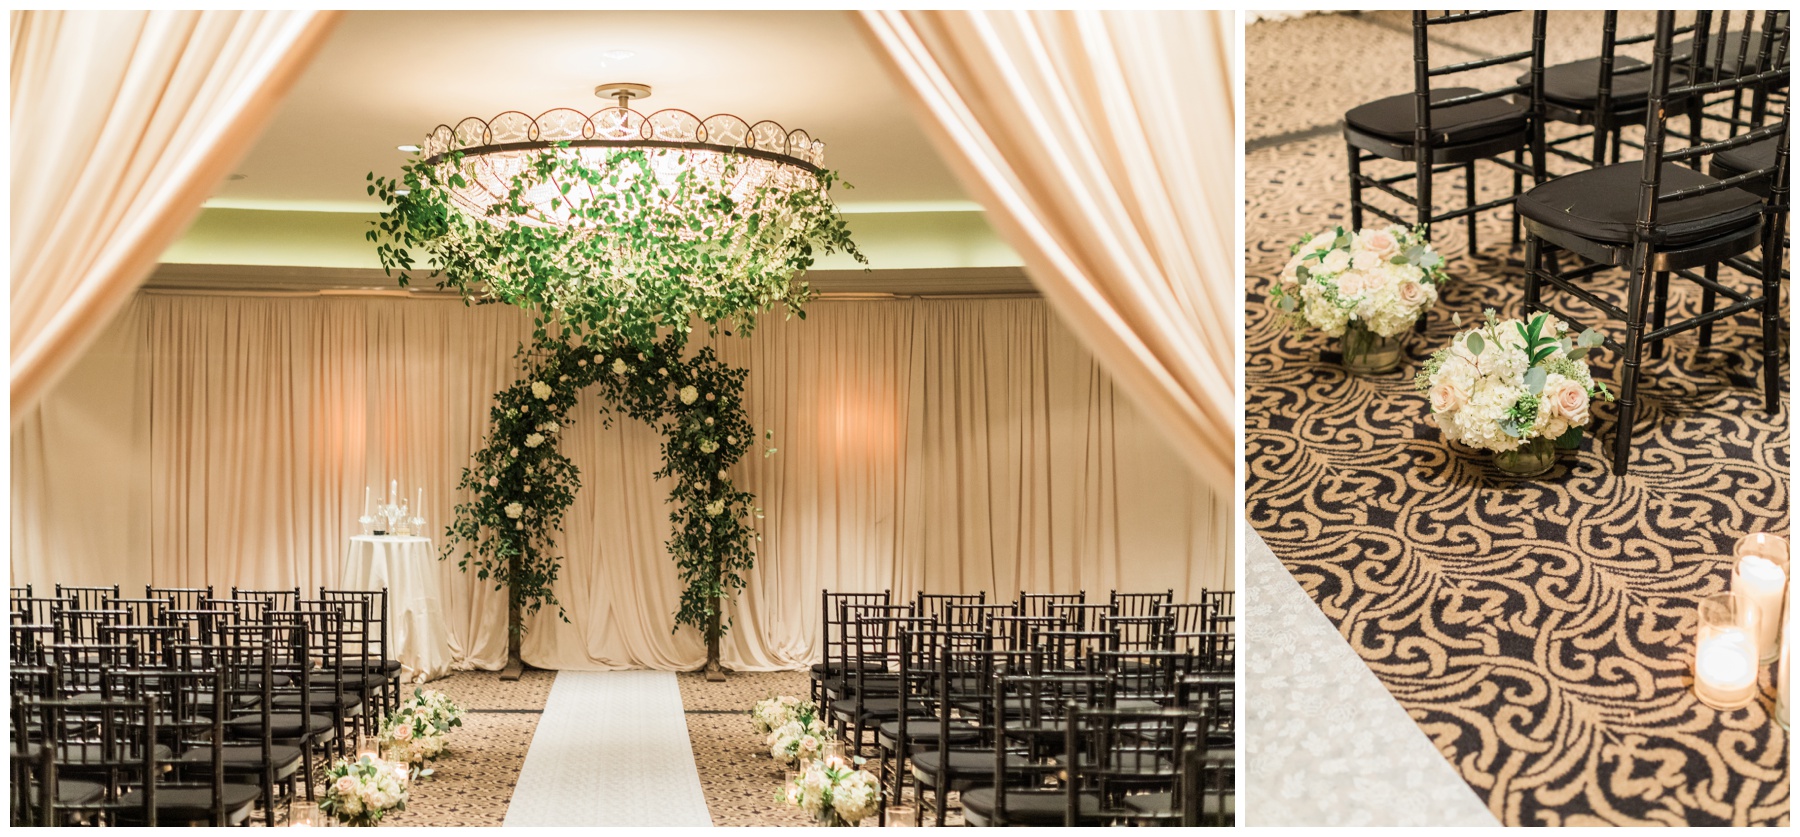 Archway with greenery and white flowers by Laurel Event Design